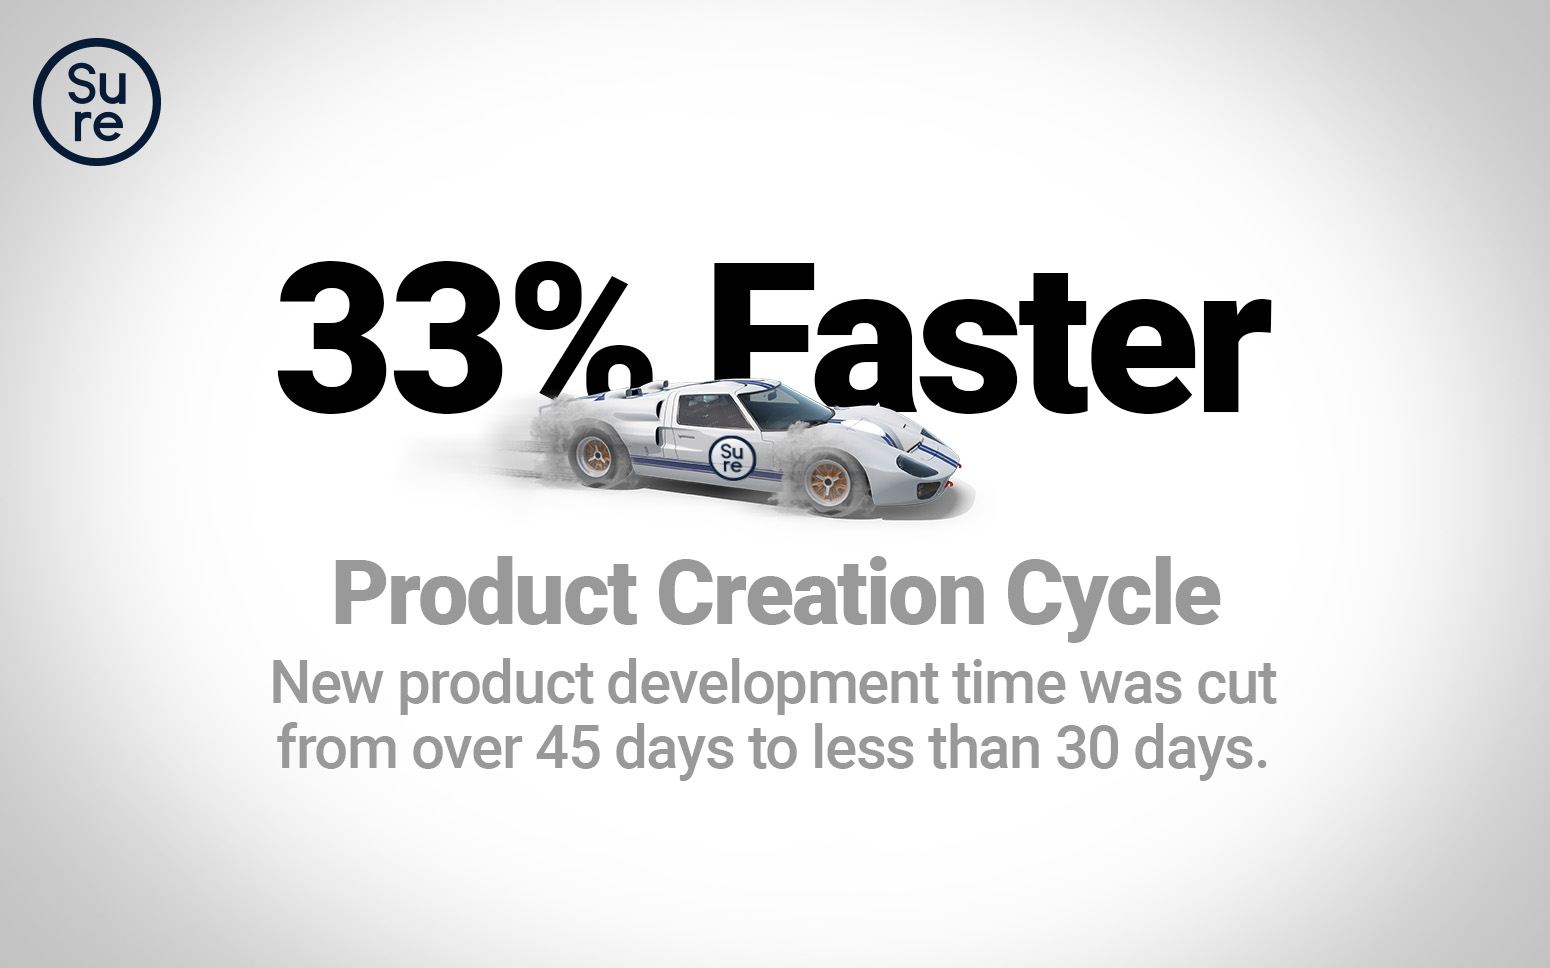 boney levy infographic product creation 33% faster with Surefront